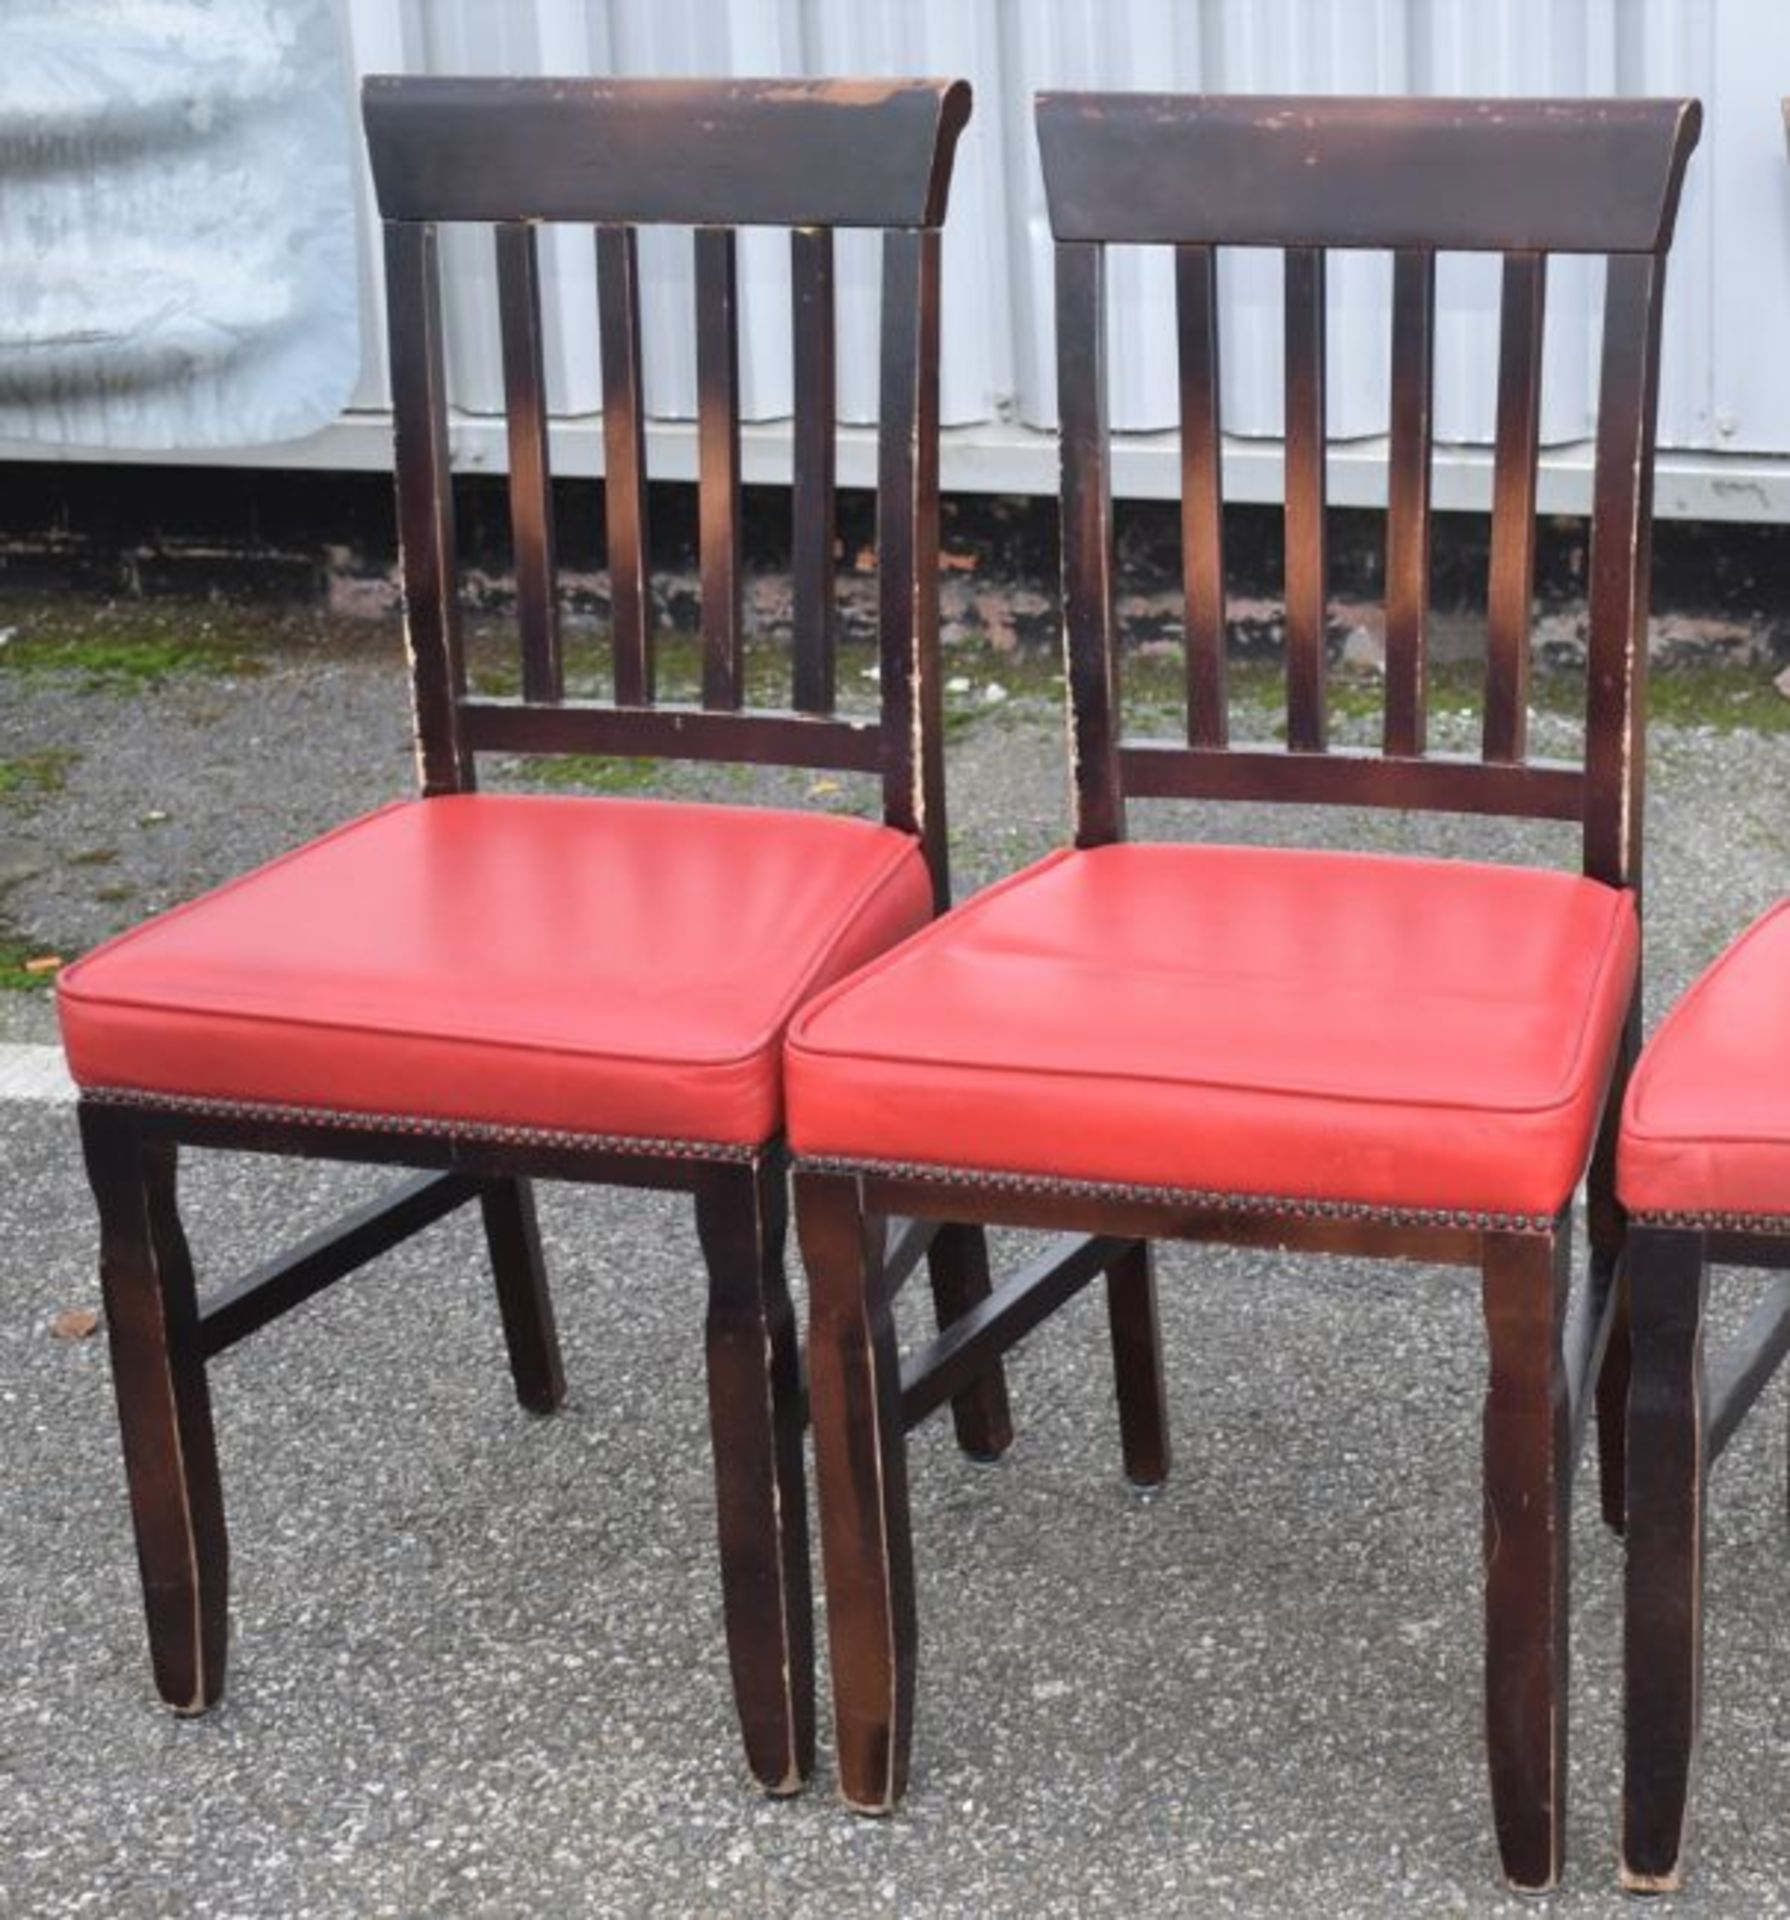 8 x Restaurant Dining Chairs With Dark Stained Wood Finish and Red Leather Seat Pads - Recently Remo - Image 6 of 6